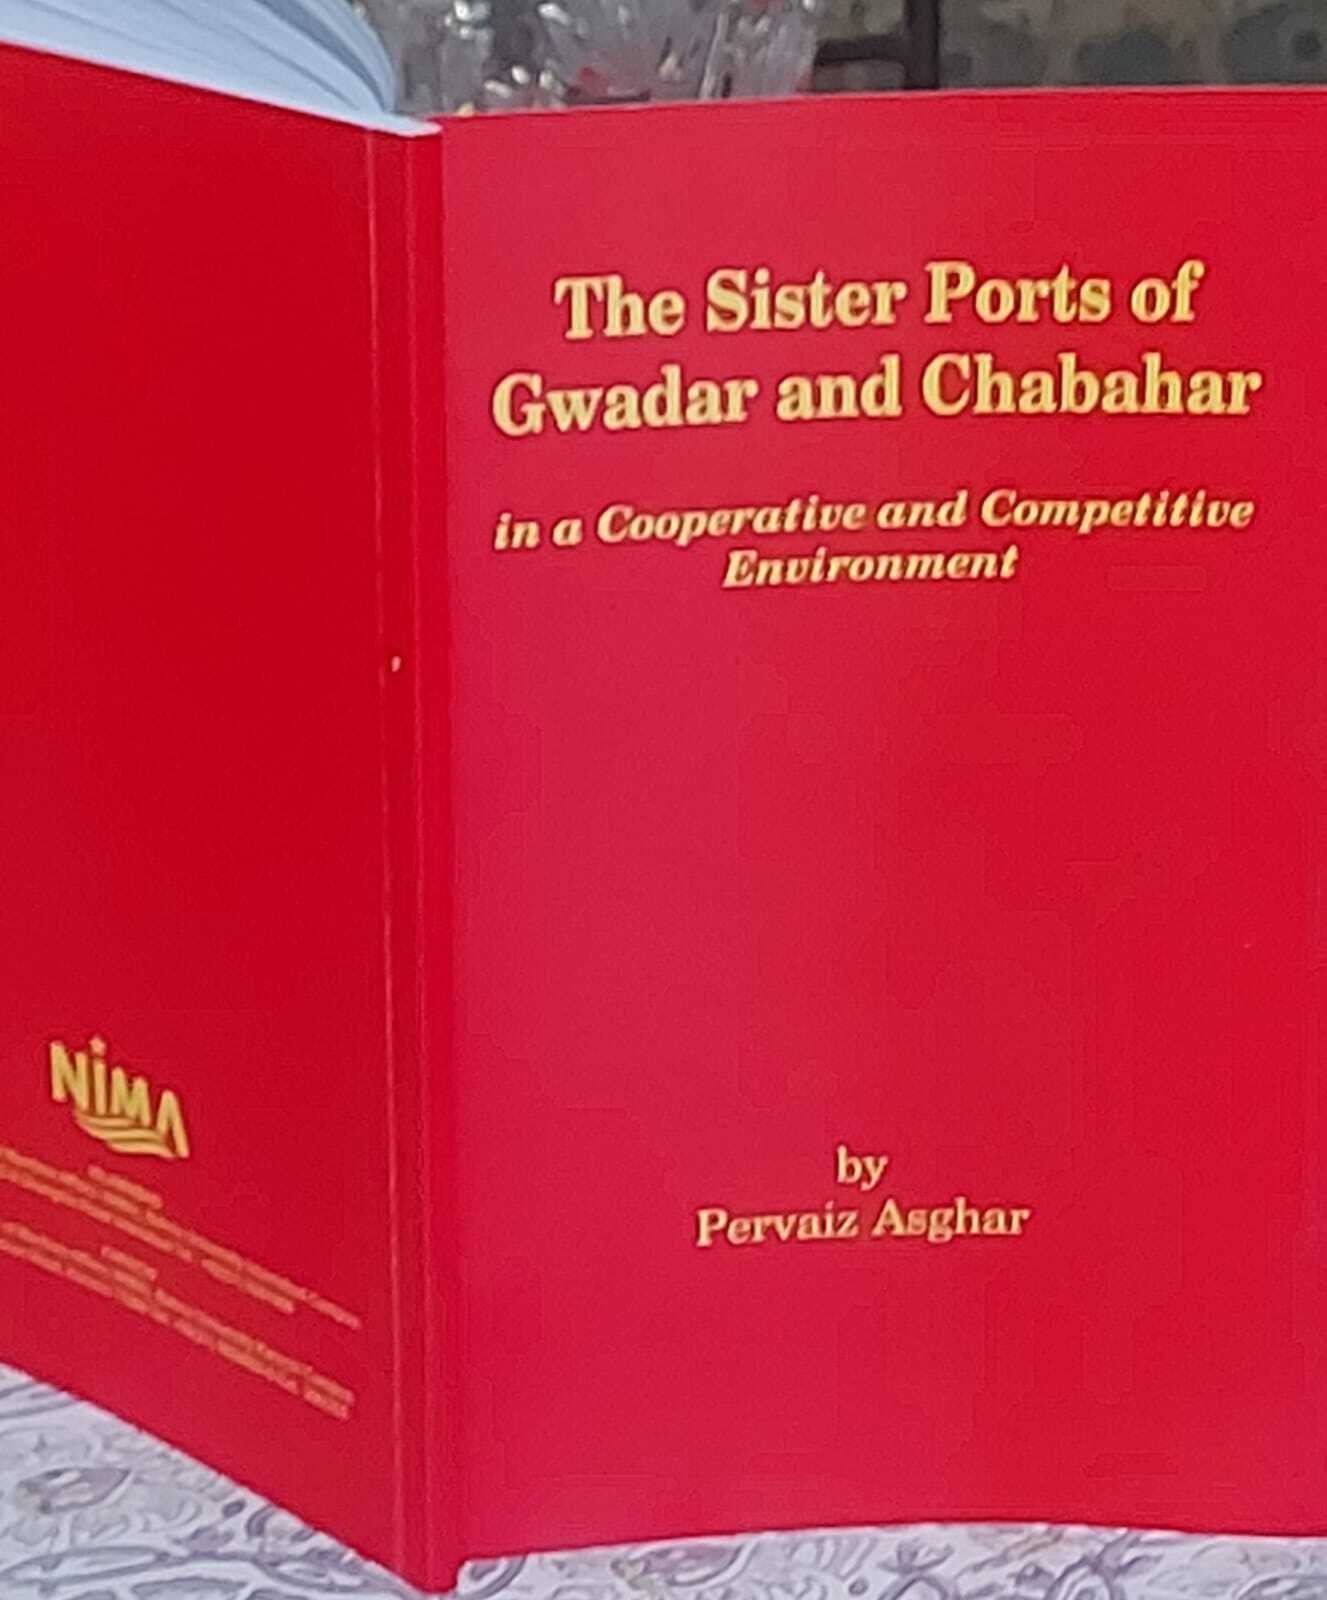 Book Review. The Sister Ports of Gwadar and Chabahar in a Cooperative and Competitive Environment" by Rear Admiral Pervaiz Asghar HI(M) Rtd